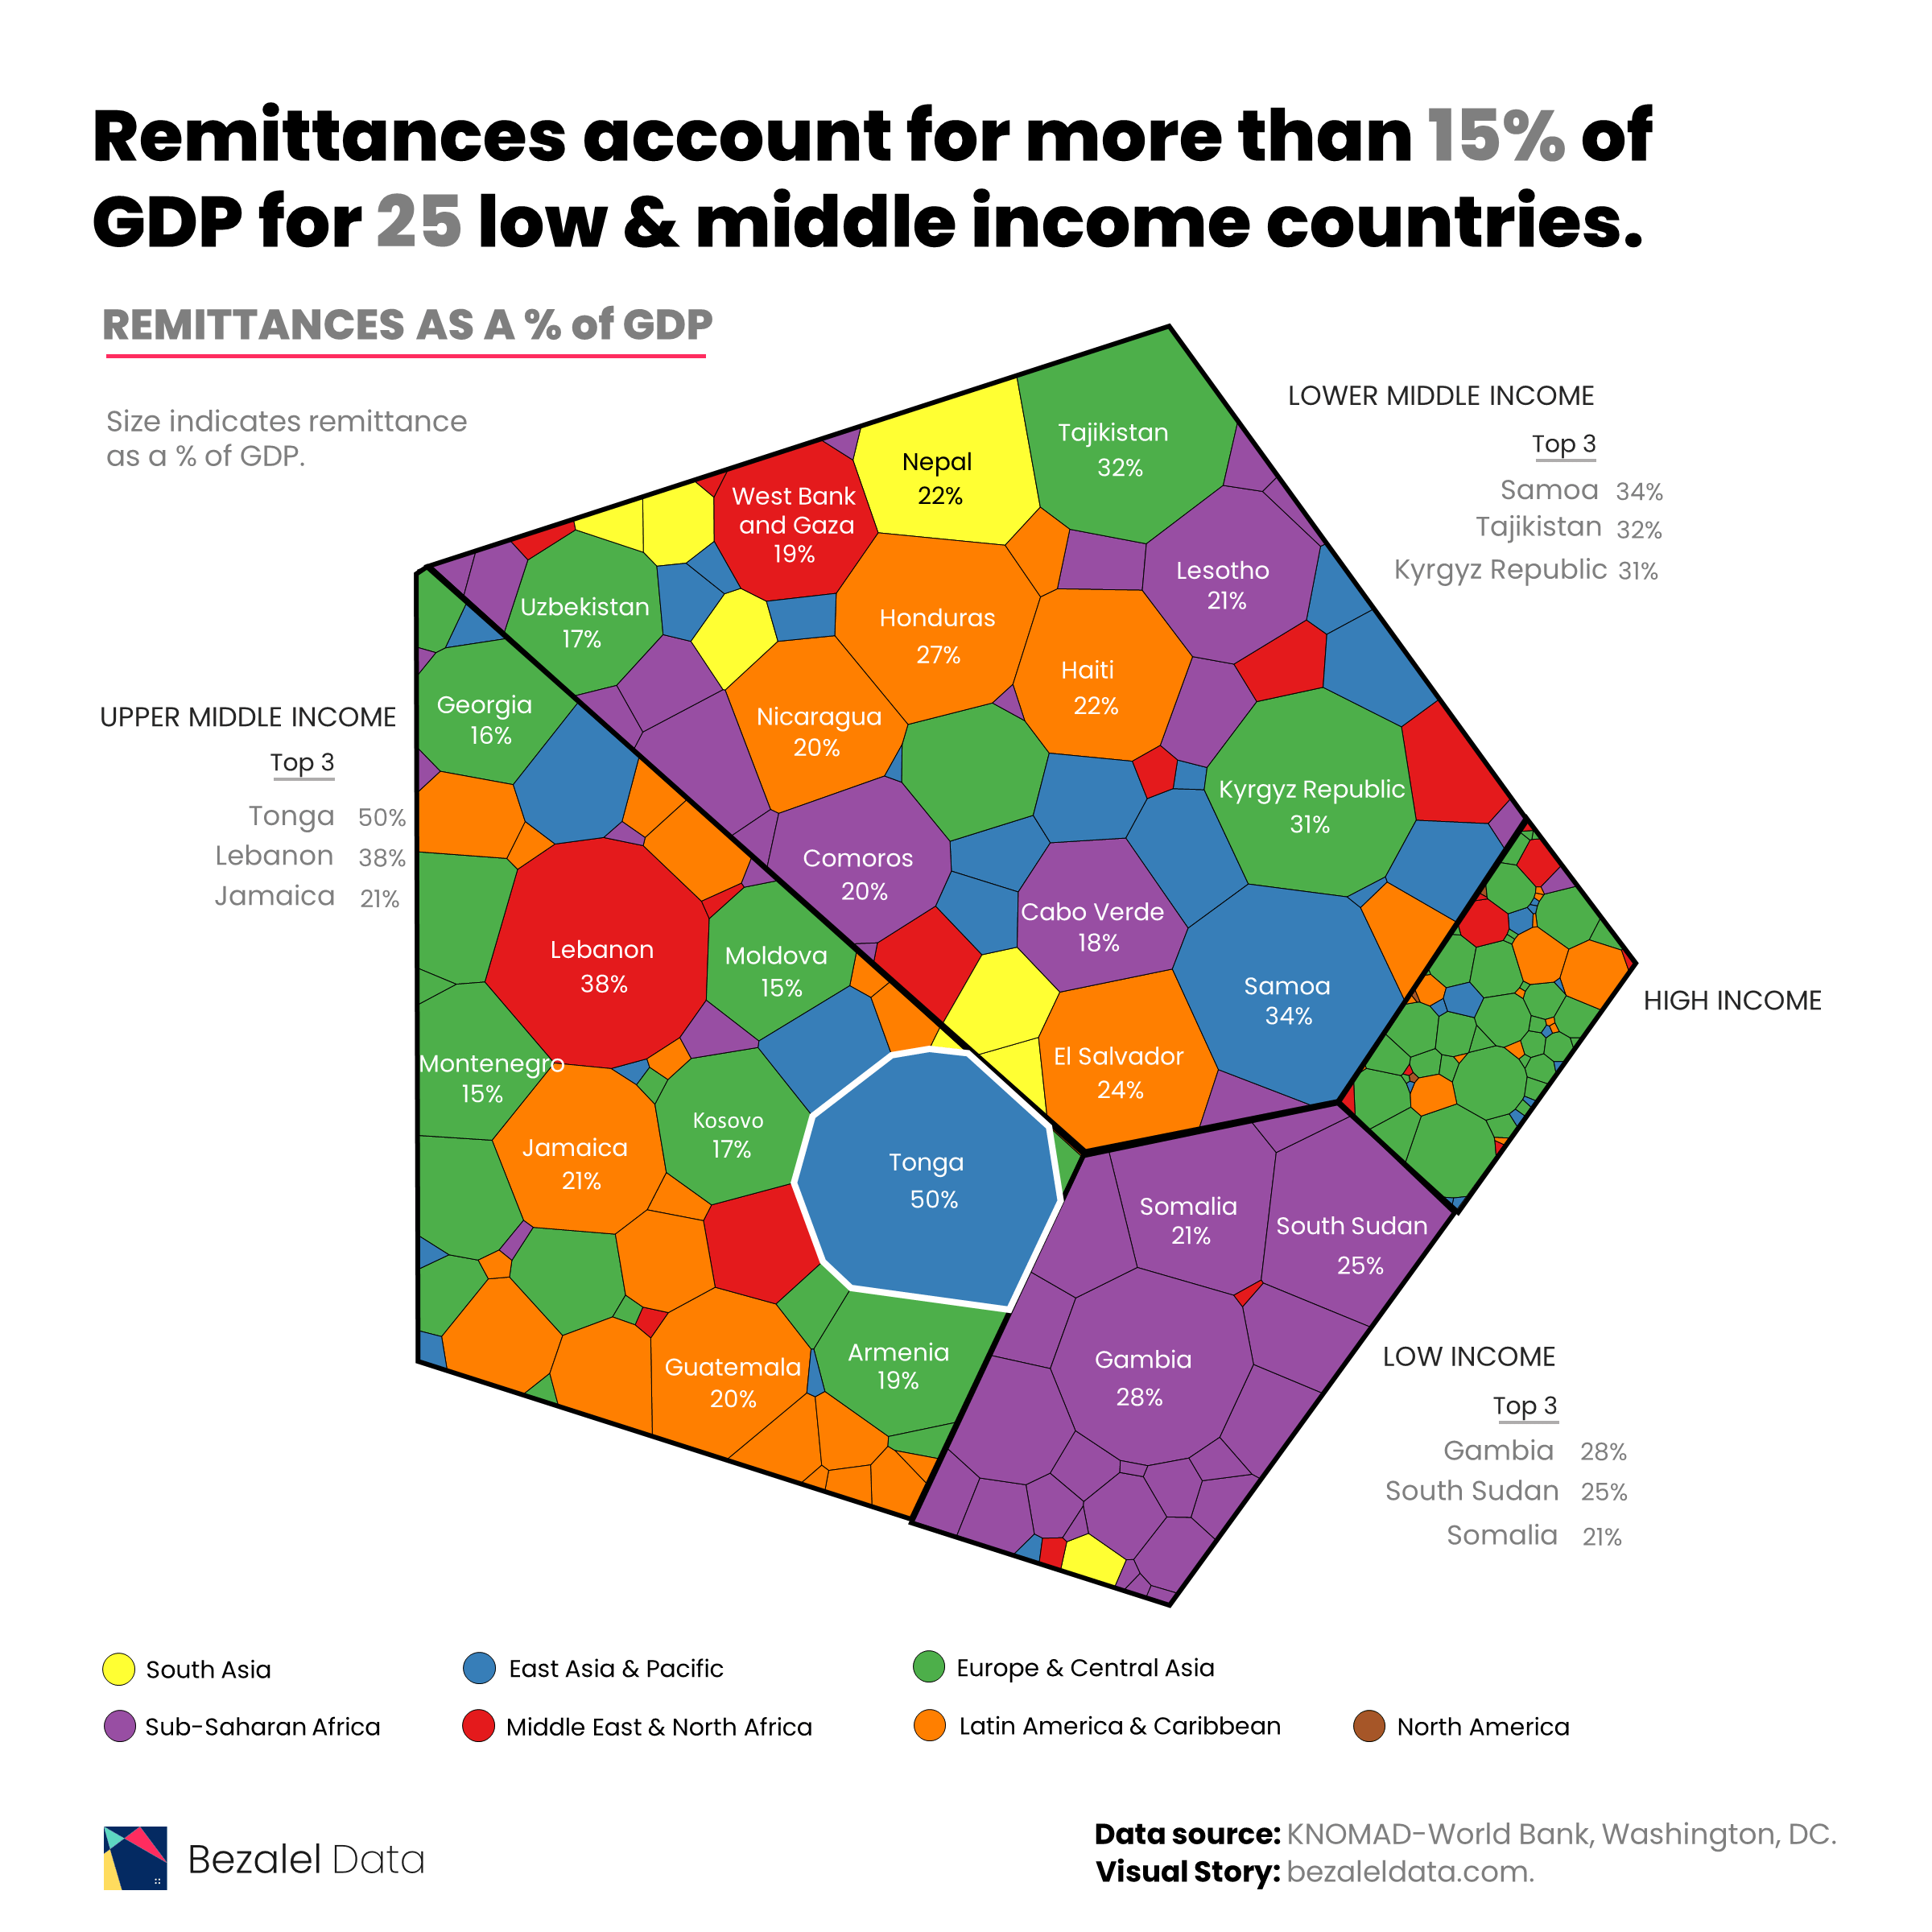 Remittances as a share of GDP